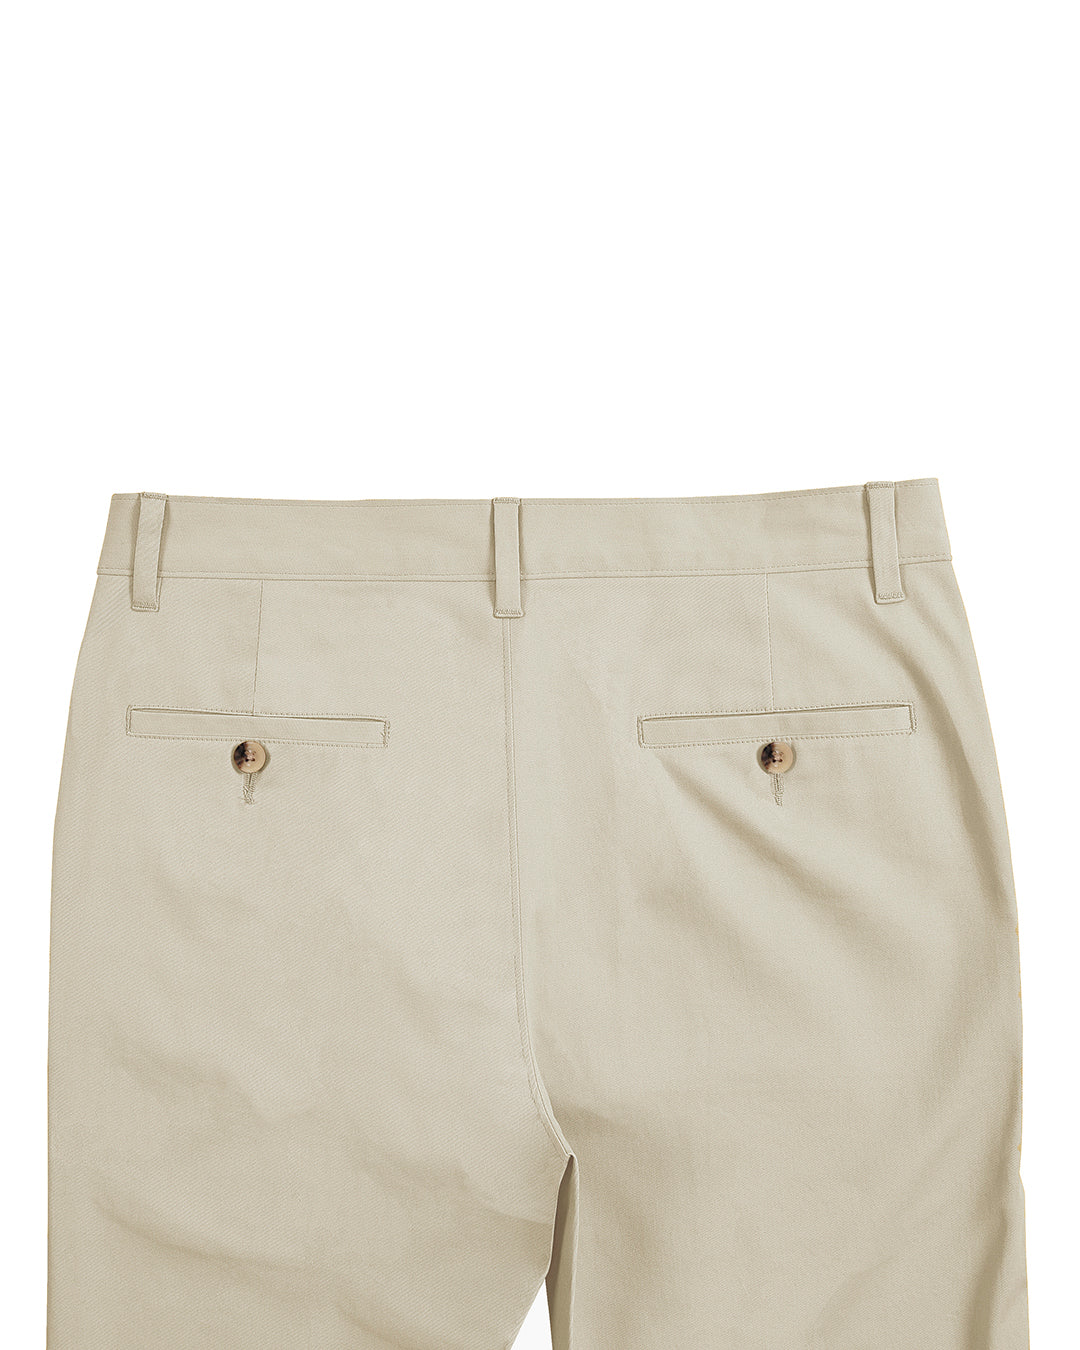 Back view of custom Genoa Chino pants for men by Luxire in light beige